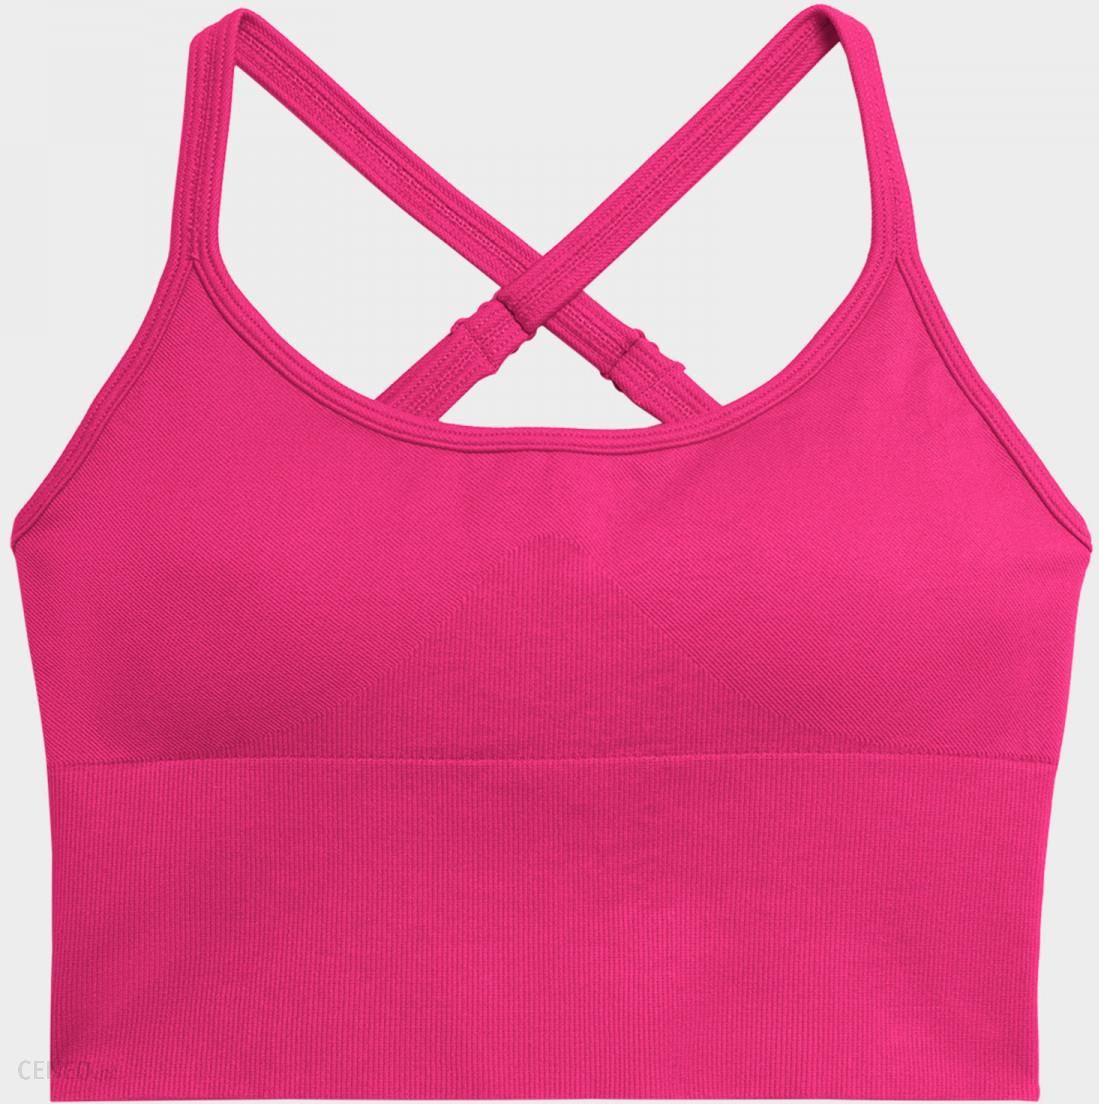 Guess Aline Top Eco Stretch Jersey Women's Bra Pink V2YP12KABR0-BLPN